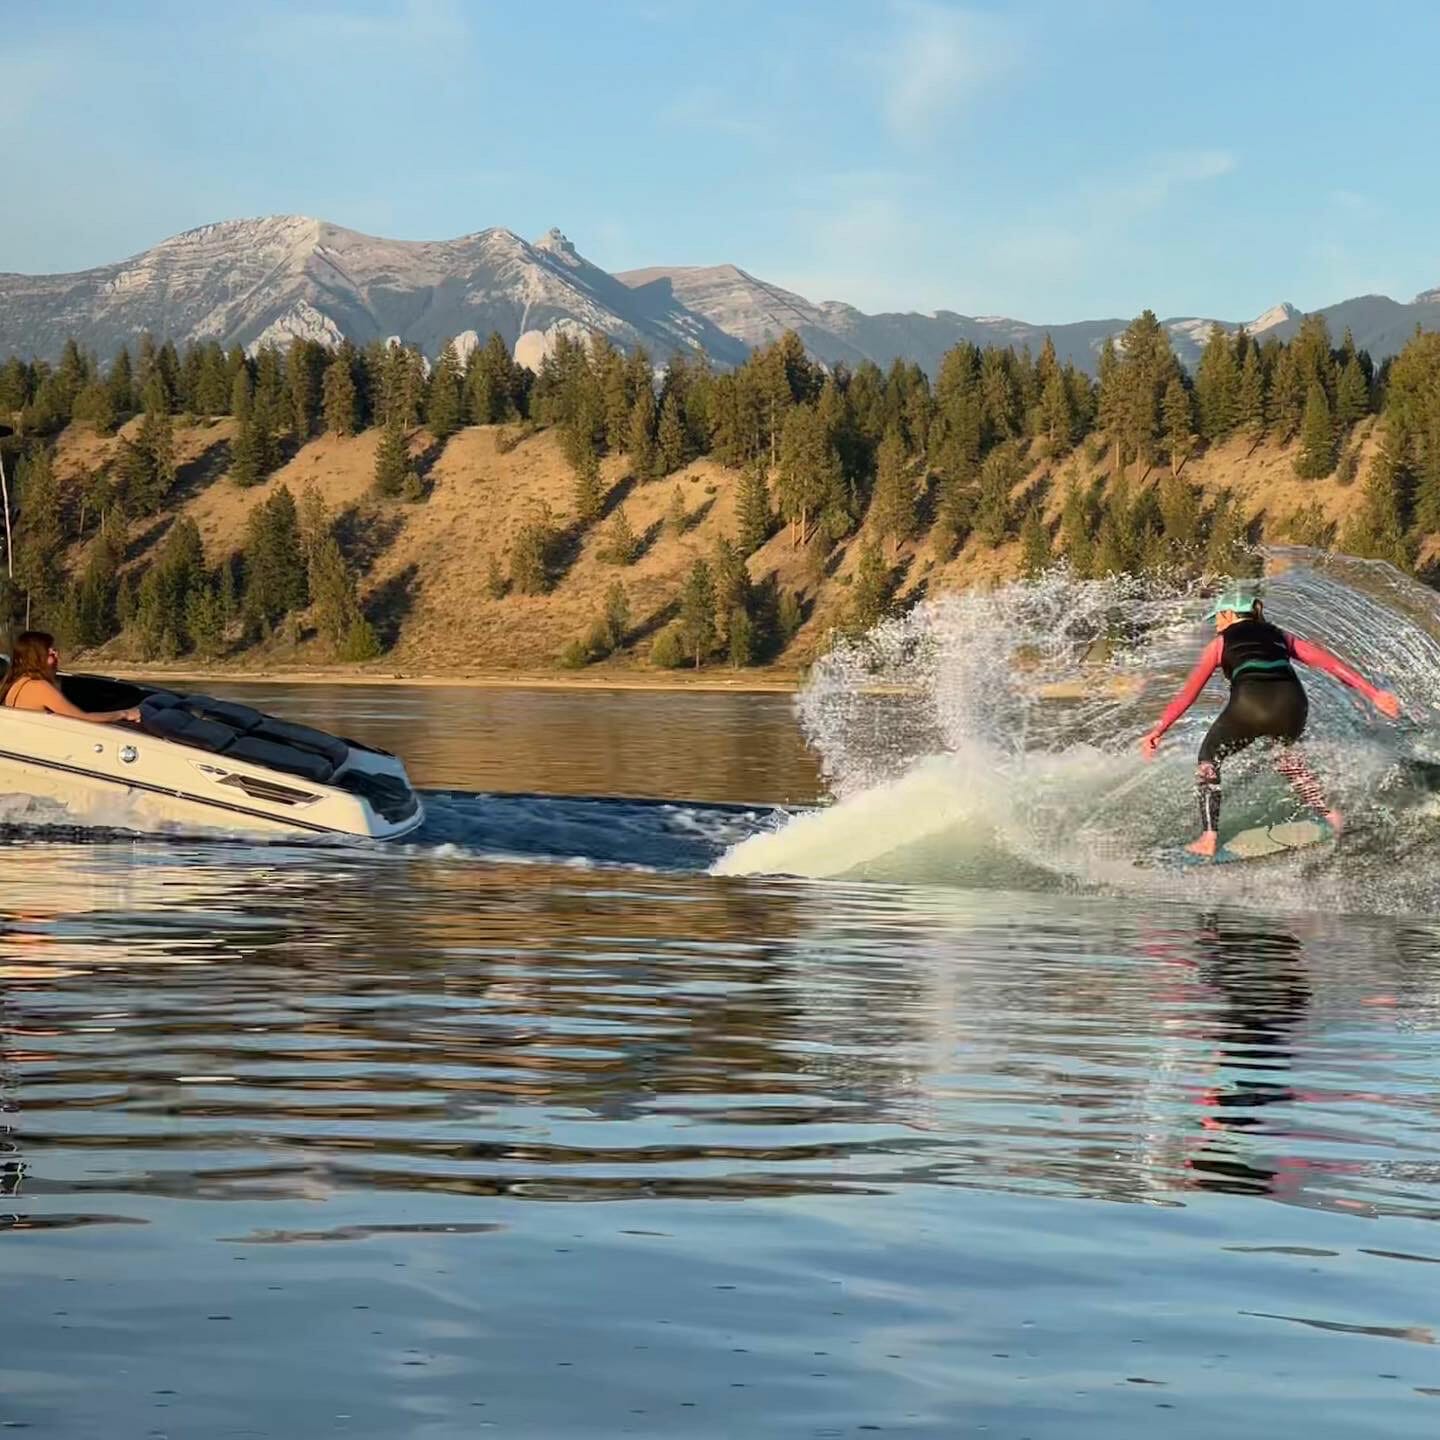 A person is wakesurfing near a wakeboat.